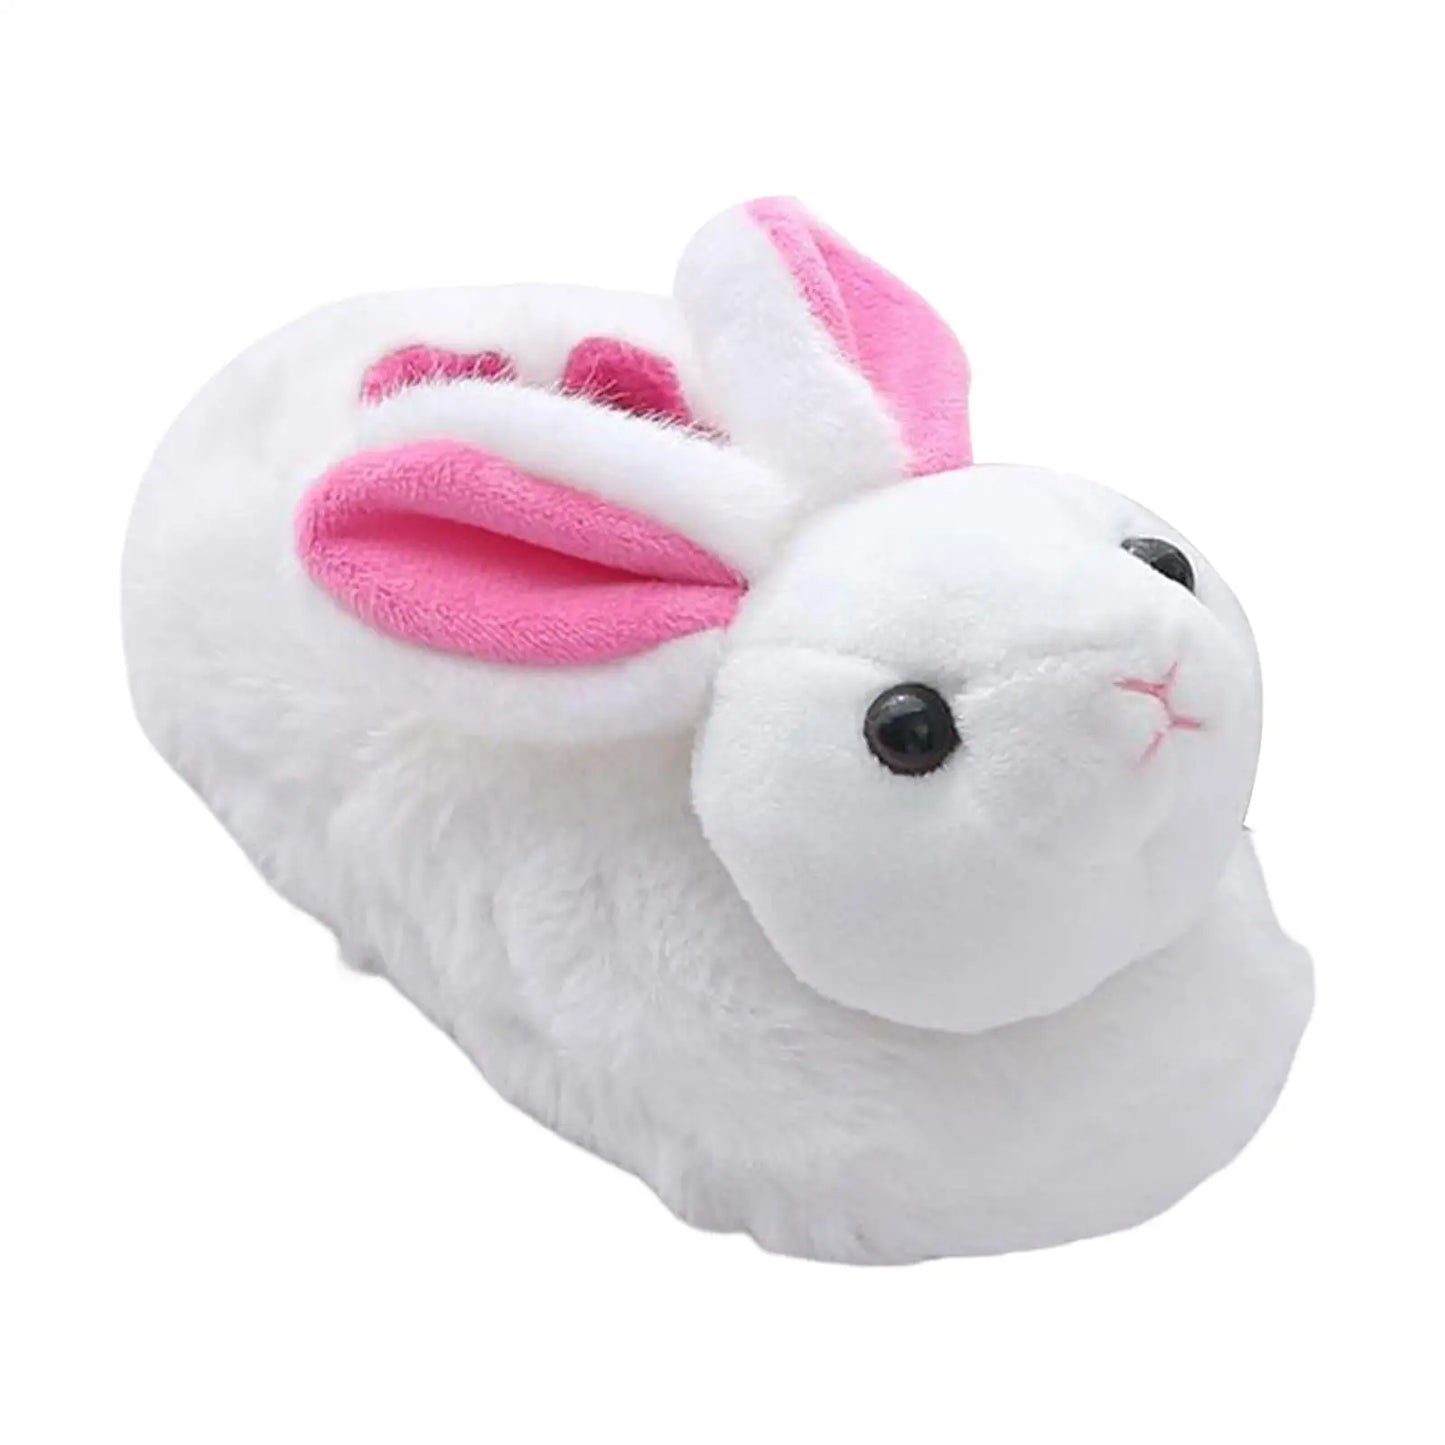 White Rabbit Slippers with Pink Ears for Girls